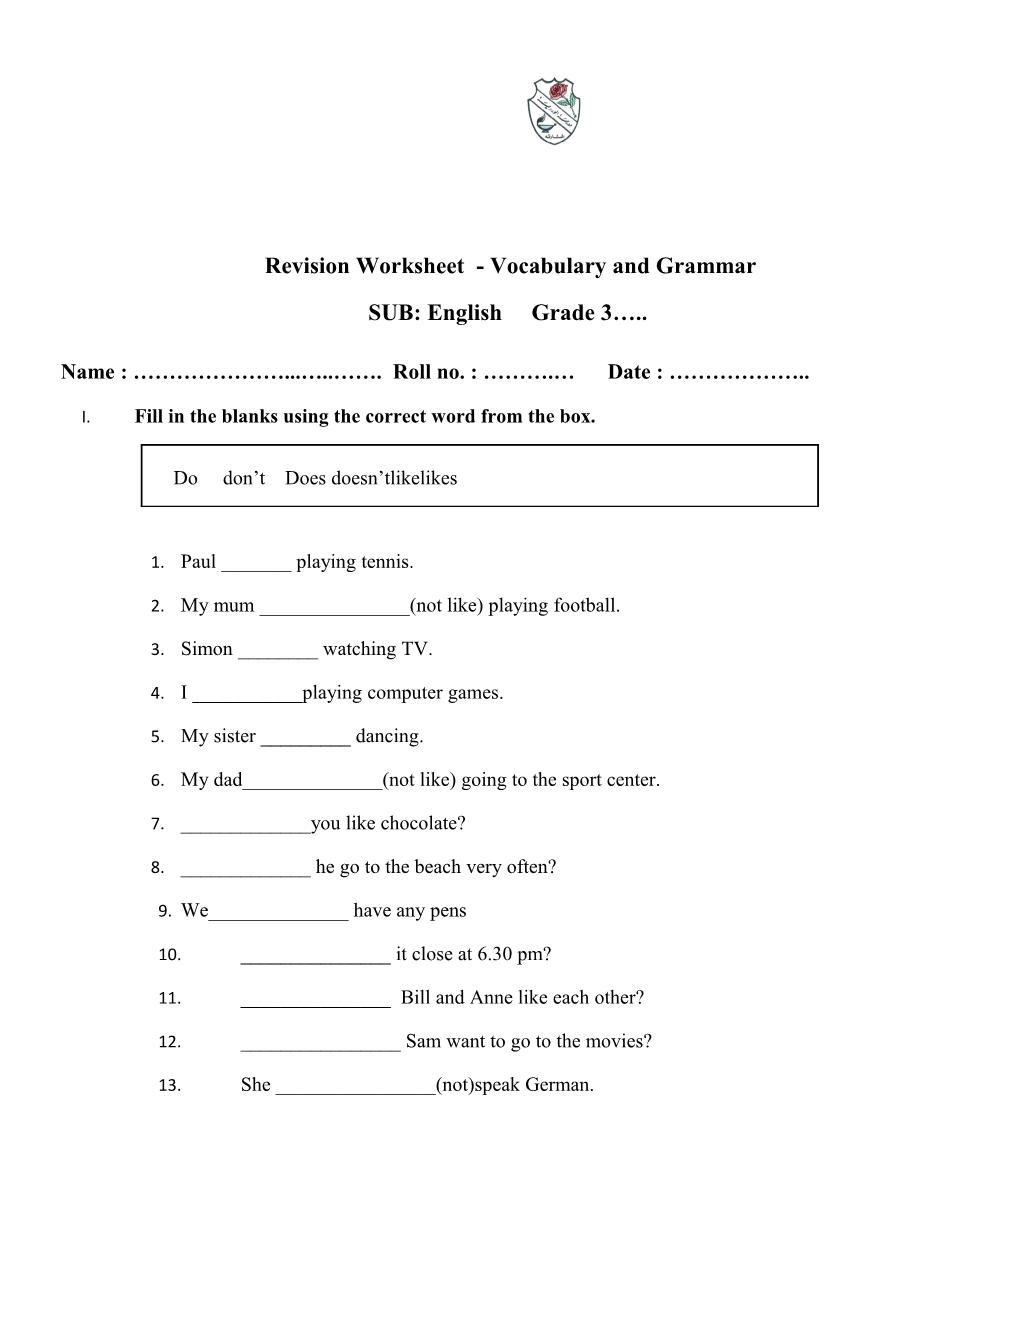 Revision Worksheet - Vocabulary and Grammar